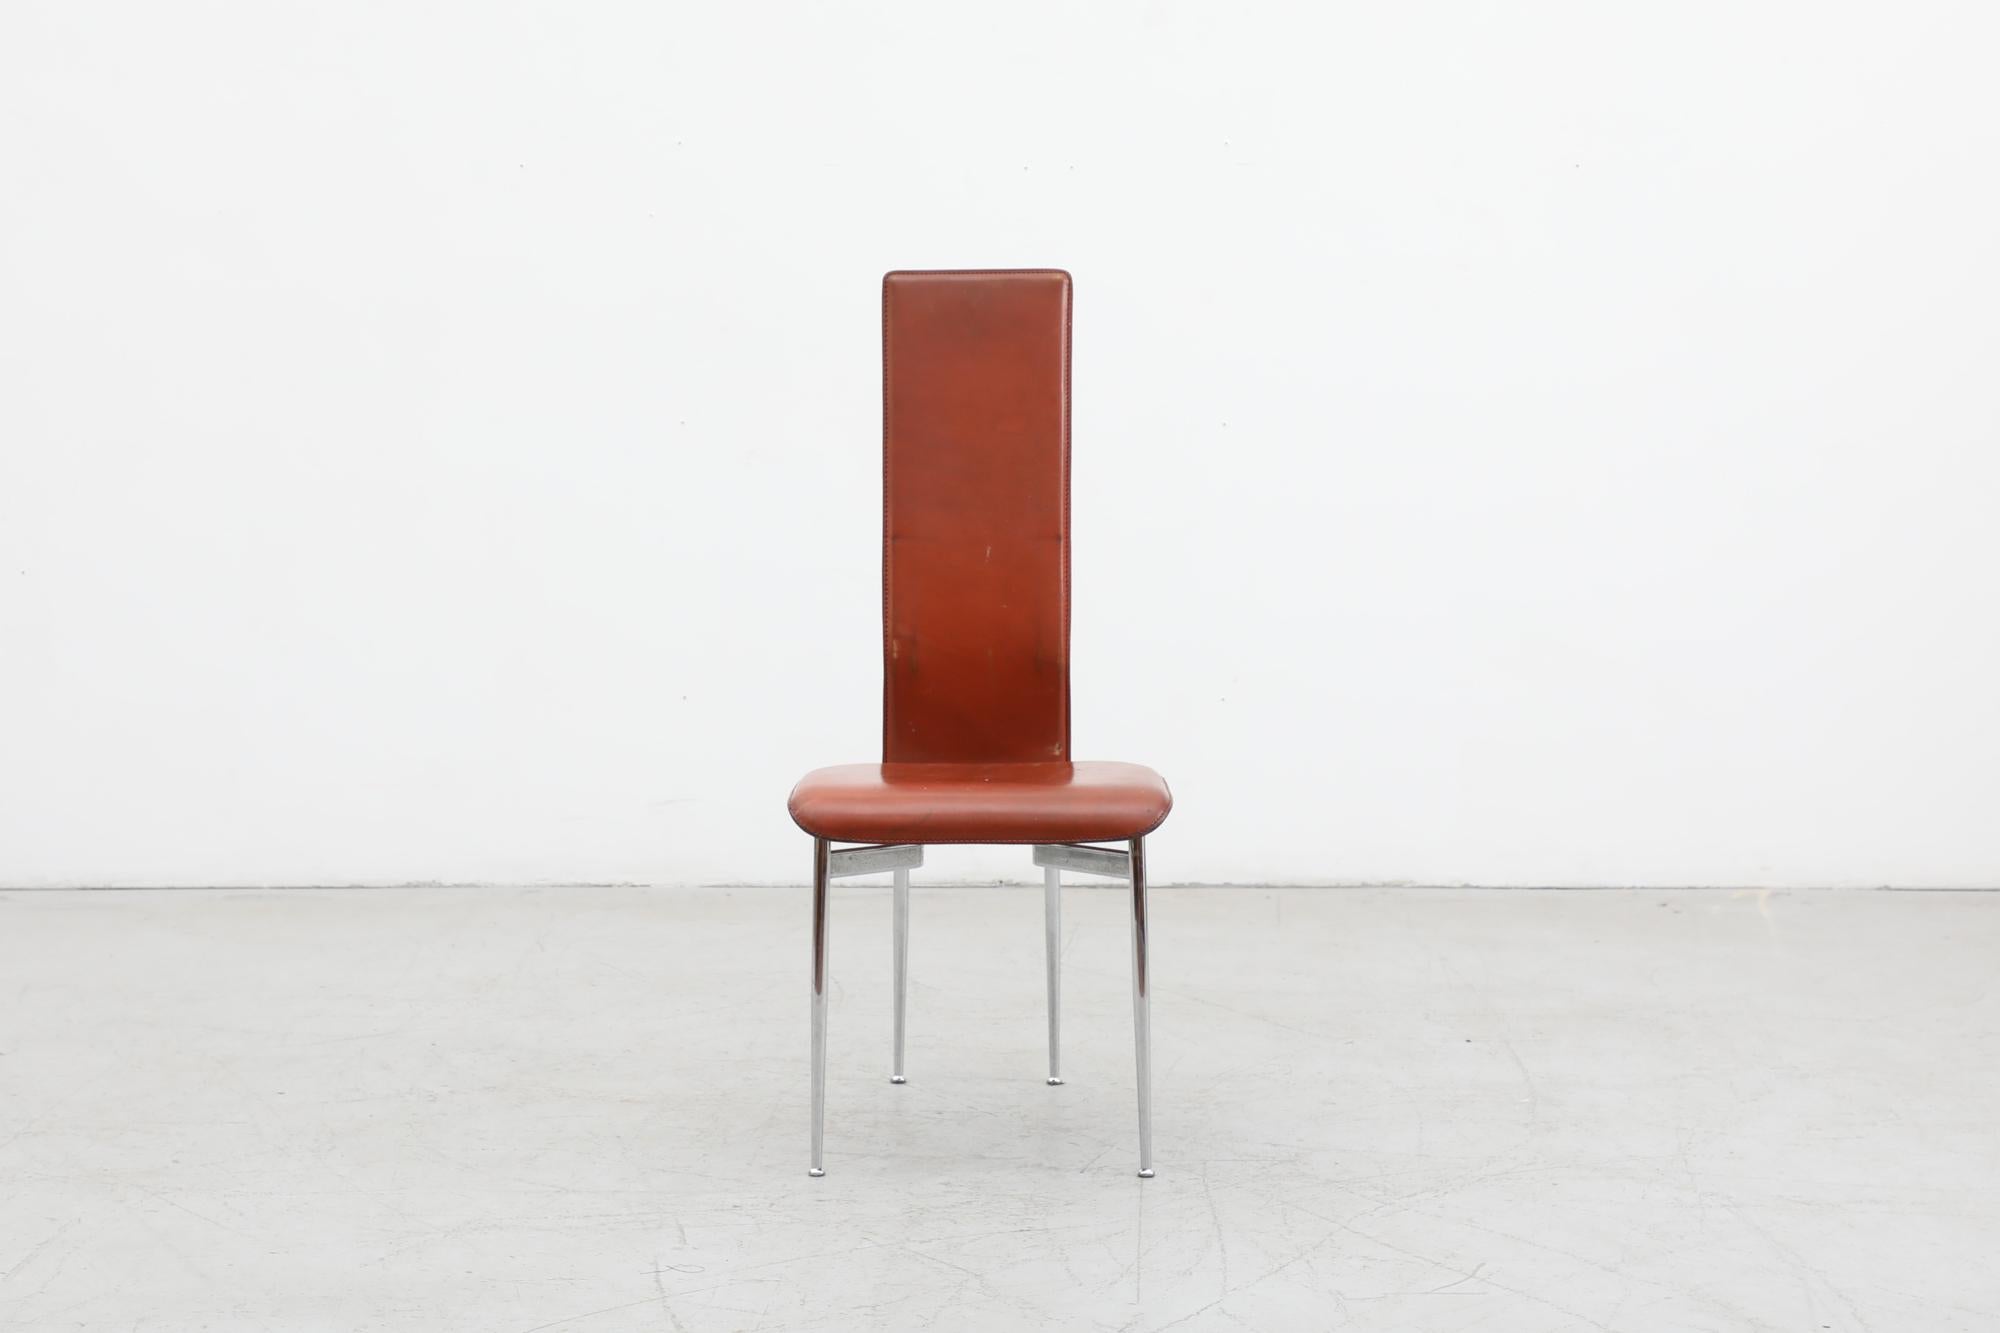 Single 'S44' Chair by Giancarlo Vegni & Gianfranco Gualtierotti for Fasem, 1980's. This chair has a cognac leather seat with chrome frame. In original condition with visible wear, including pitting and discoloration to the chrome and patina on